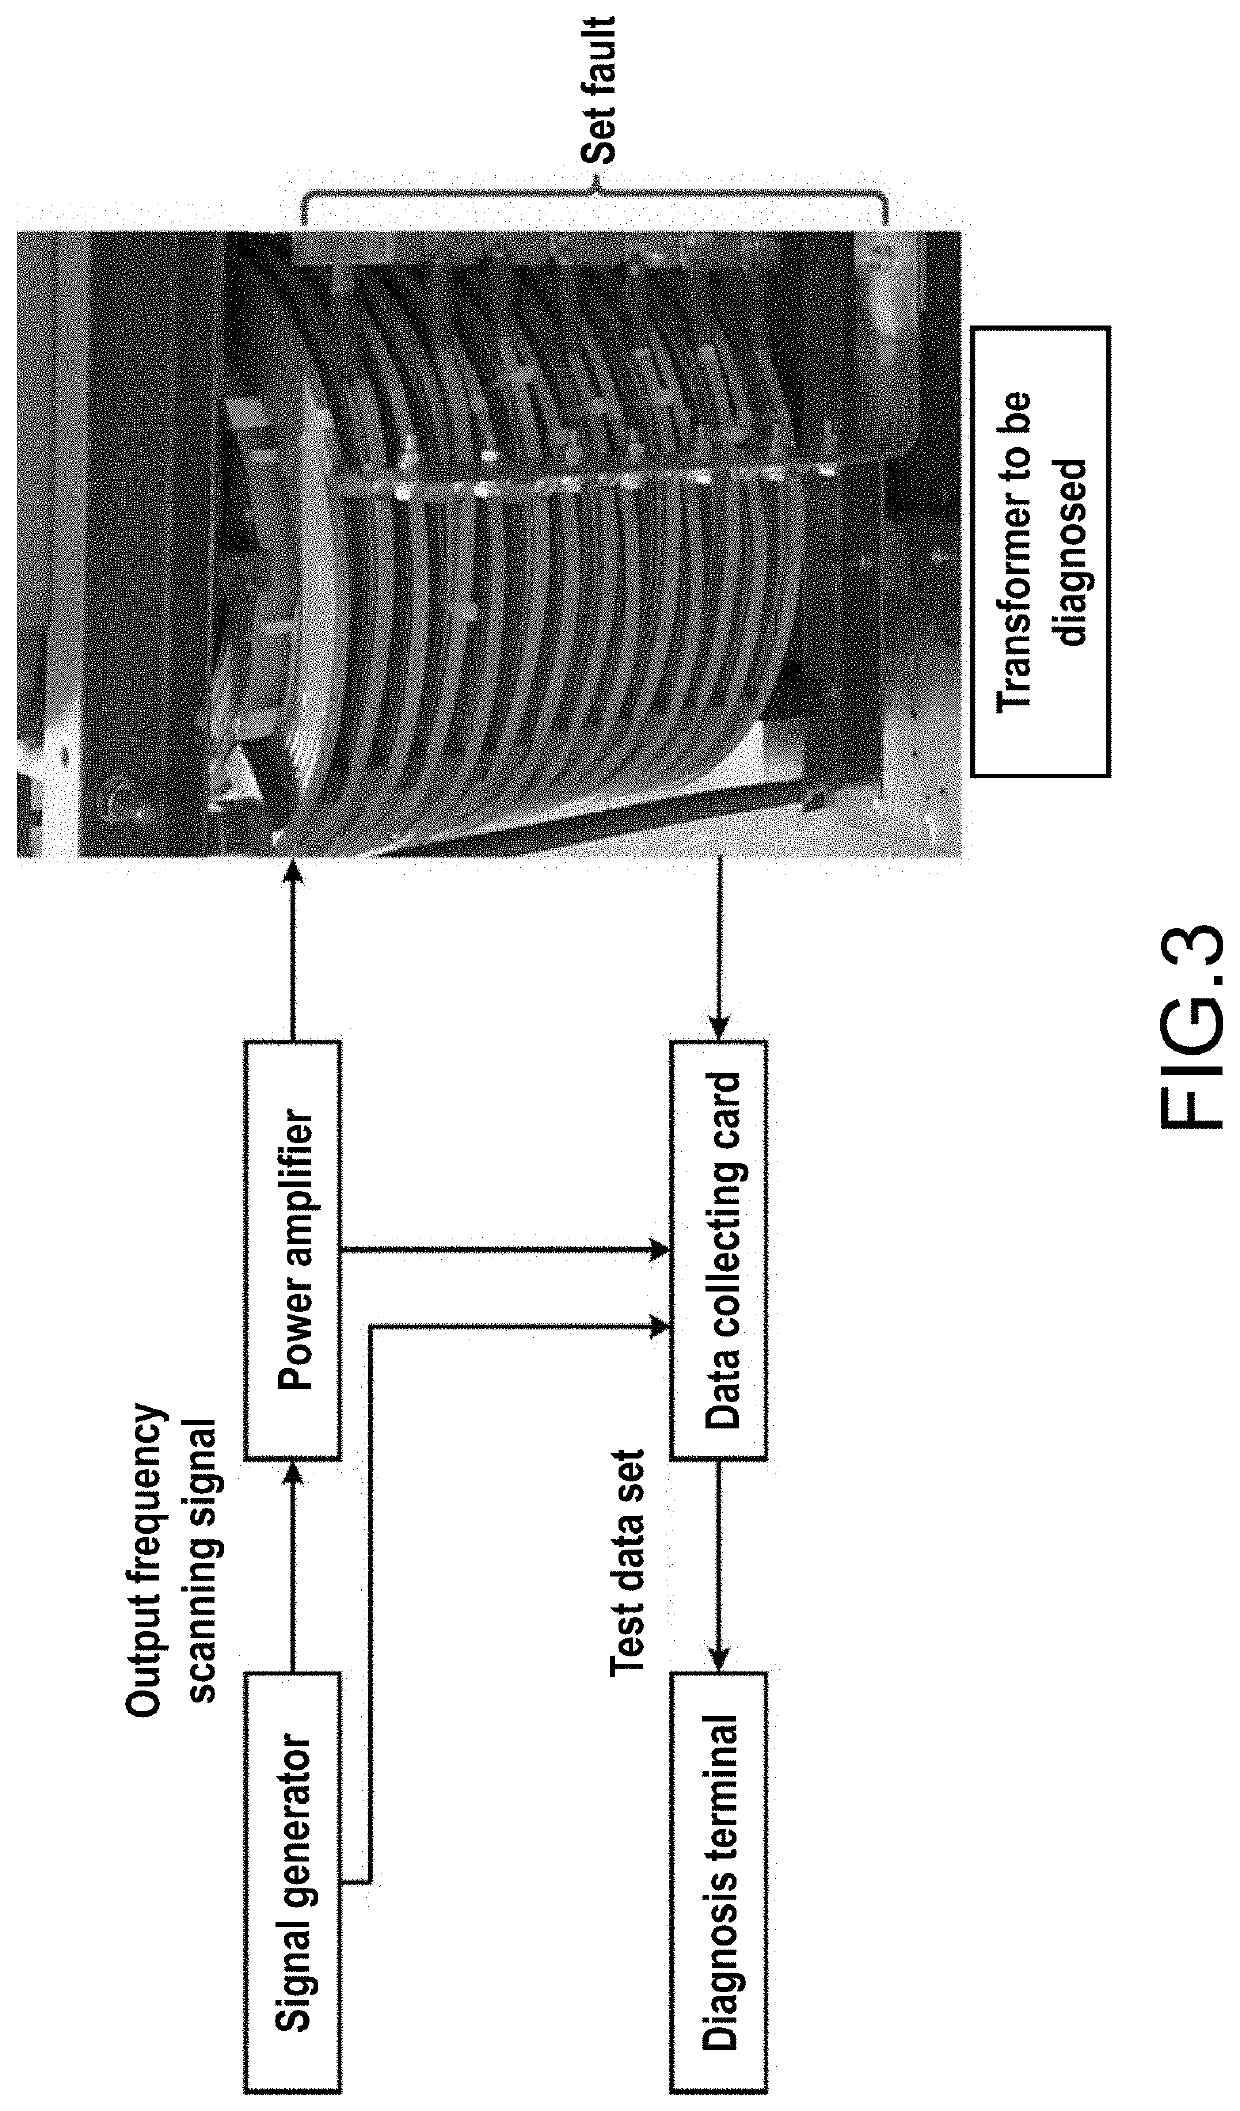 Method and system for fault diagnosis with small samples of power equipment based on virtual and real twin spaces